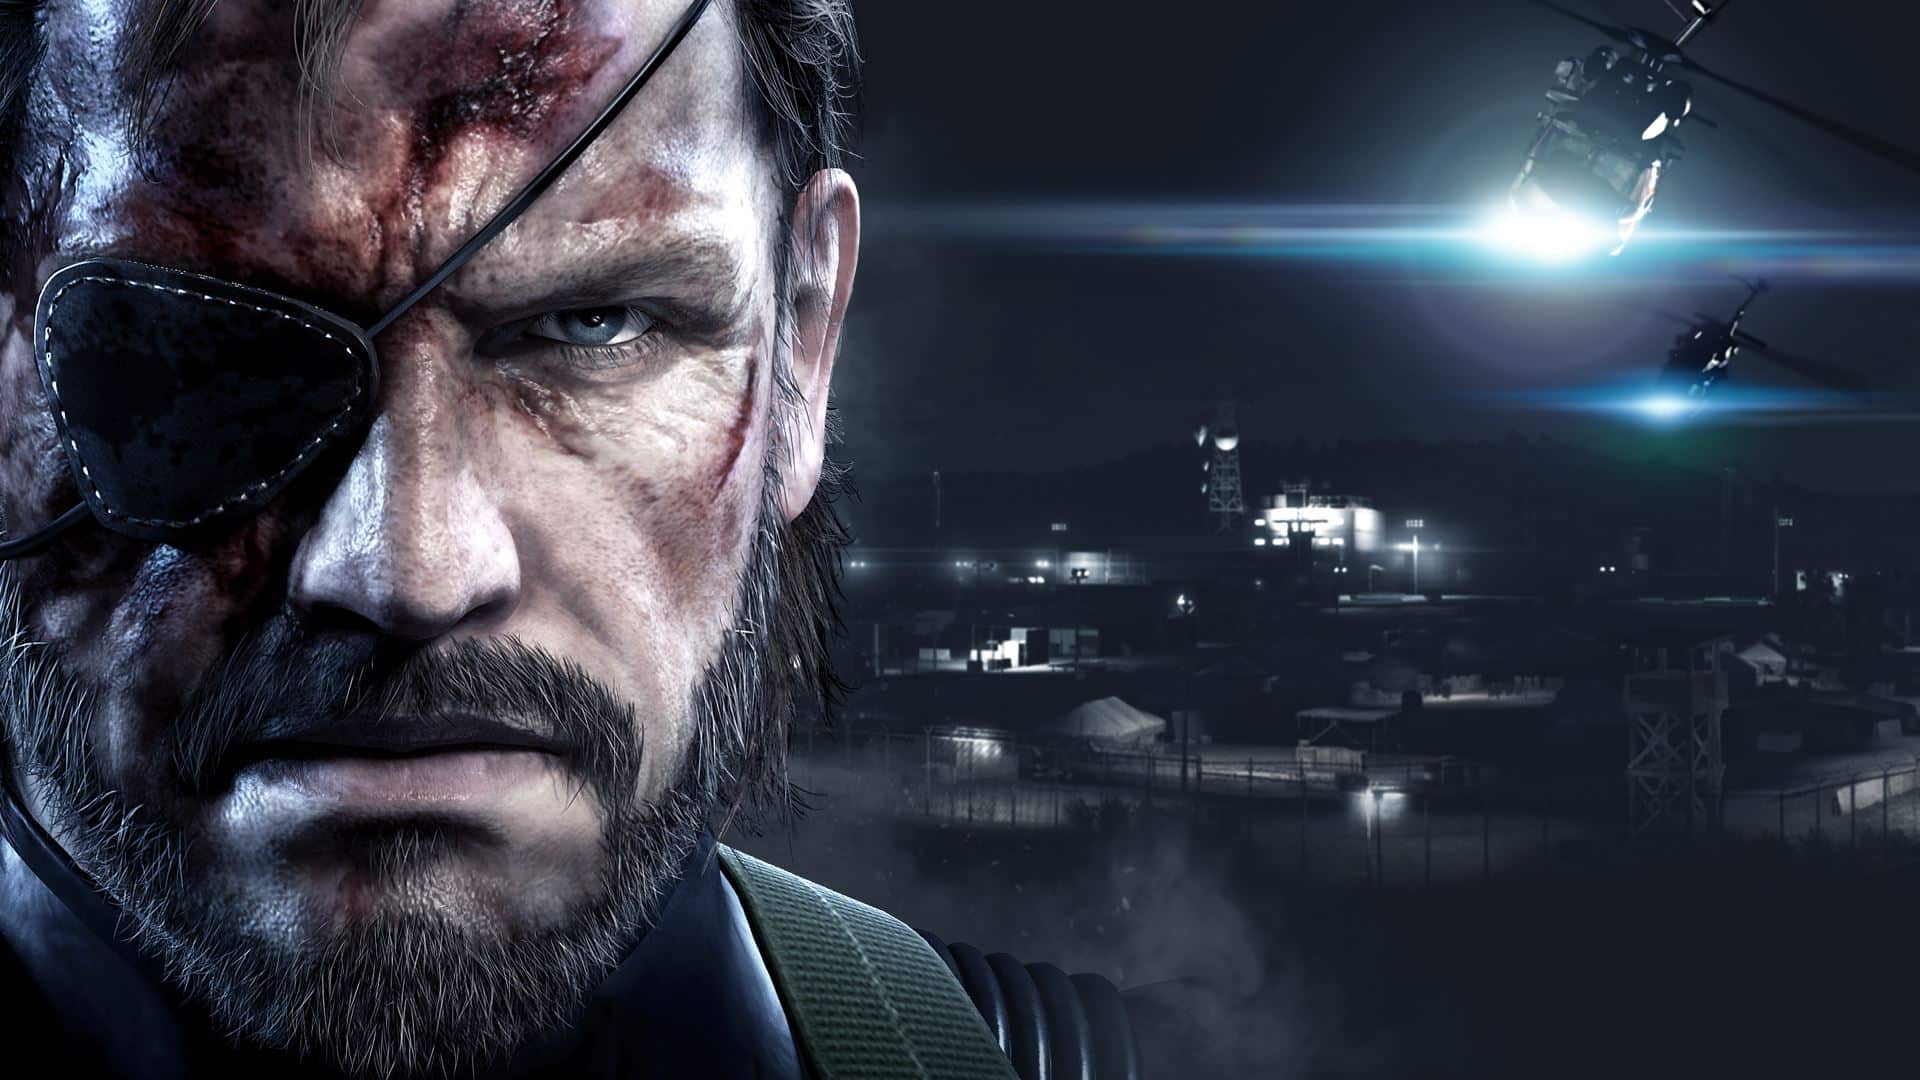 Annunciato Metal Gear Solid V The Definitive Experience PCGaming.it